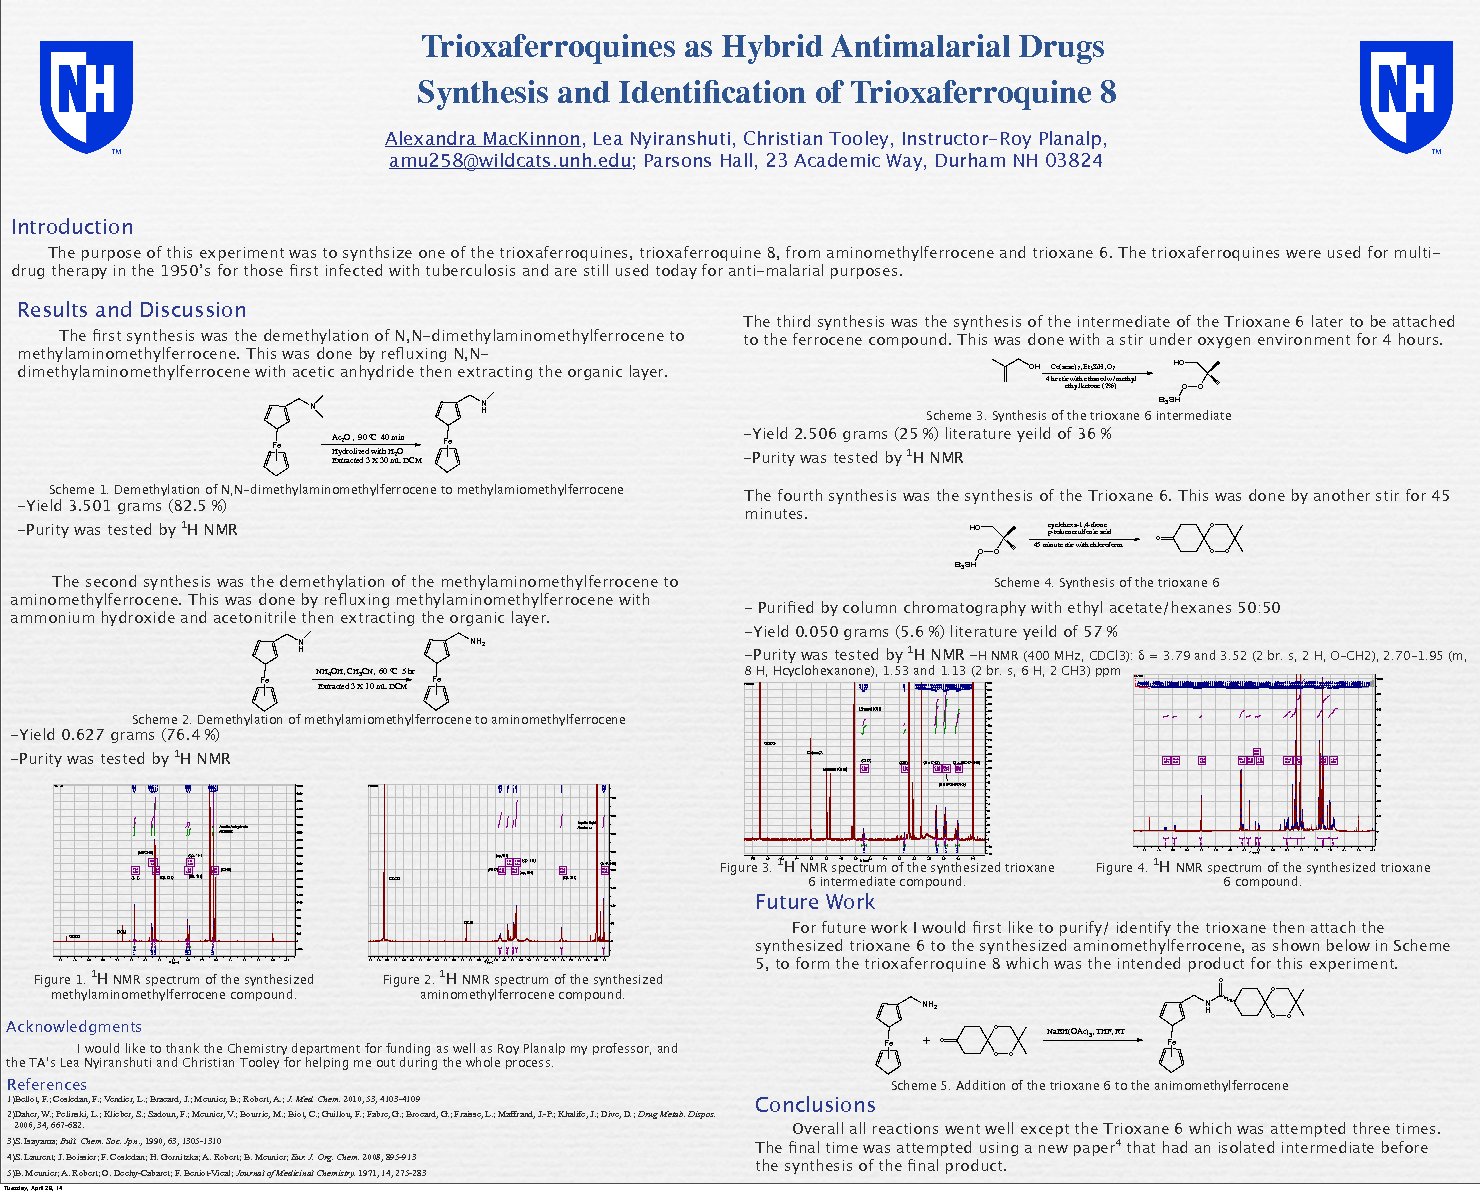 Trioxaferroquines As Hybrid Antimalarial Drugs  Synthesis And Identification Of Trioxaferroquine 8 by amu258